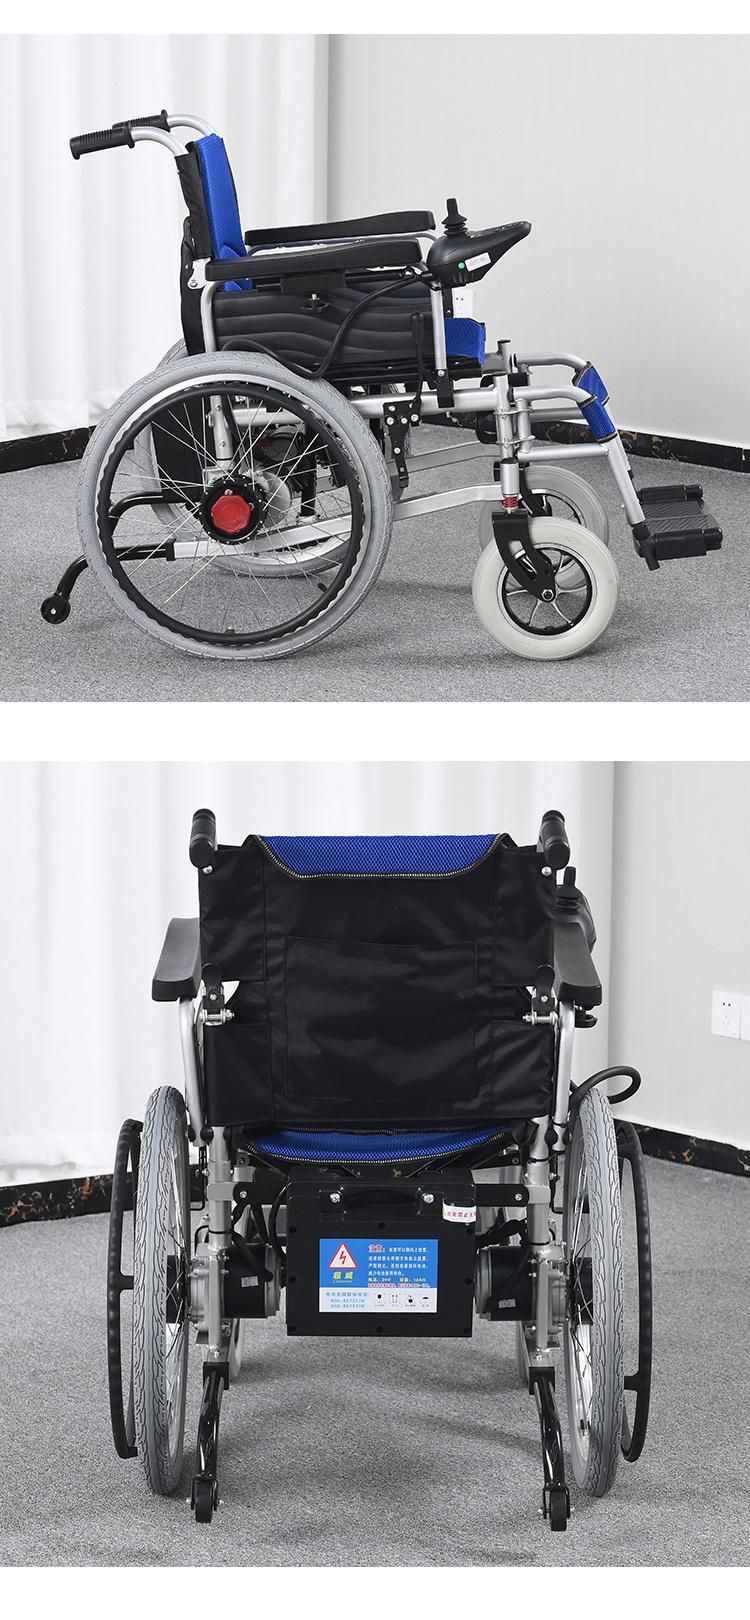 Popular Electric Wheelchair Carbon Steel Material with Big Rear Wheels